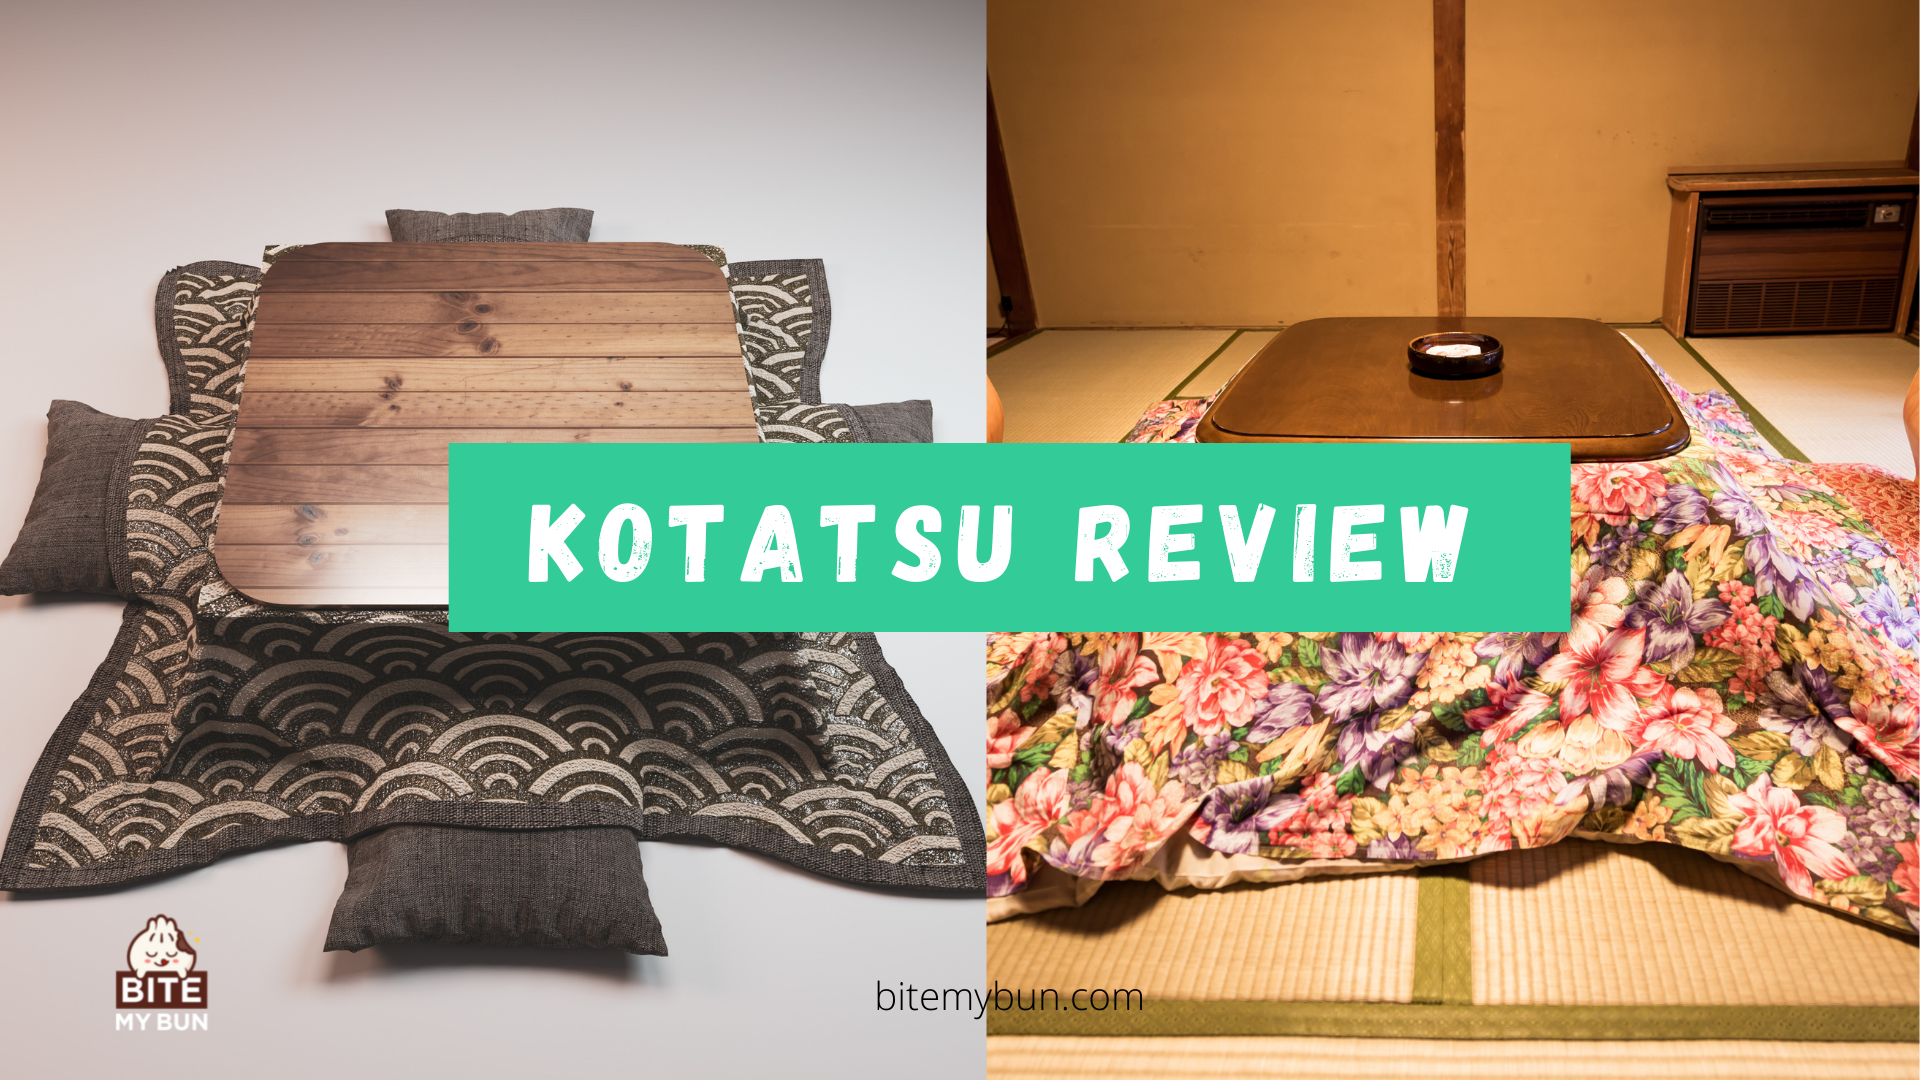 Kotatsu Japanese table heater review | The best traditional & comfy options